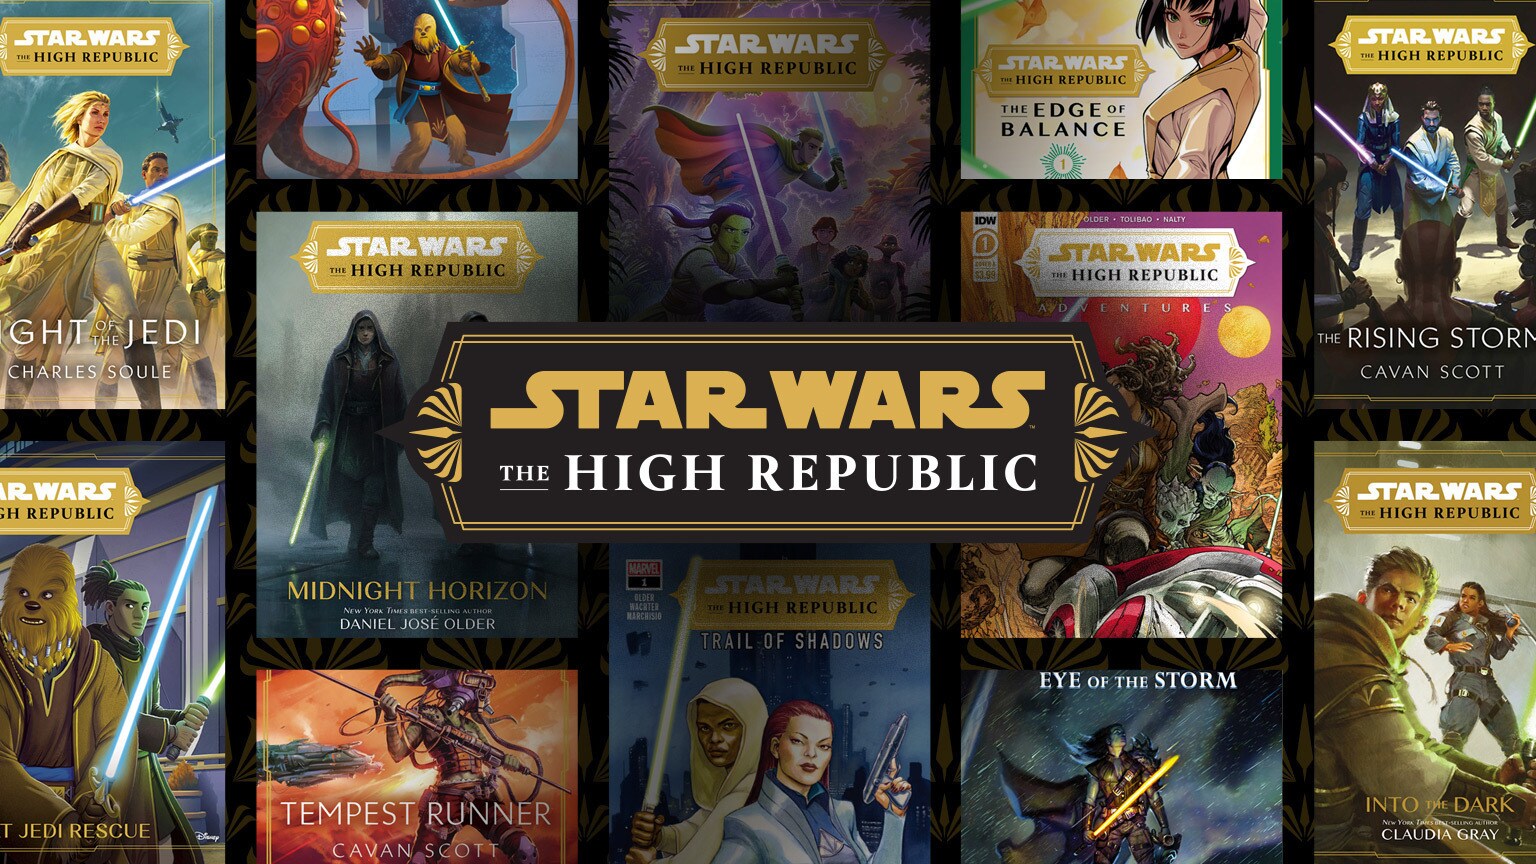 What are the best Star Wars books set during the High Republic era?